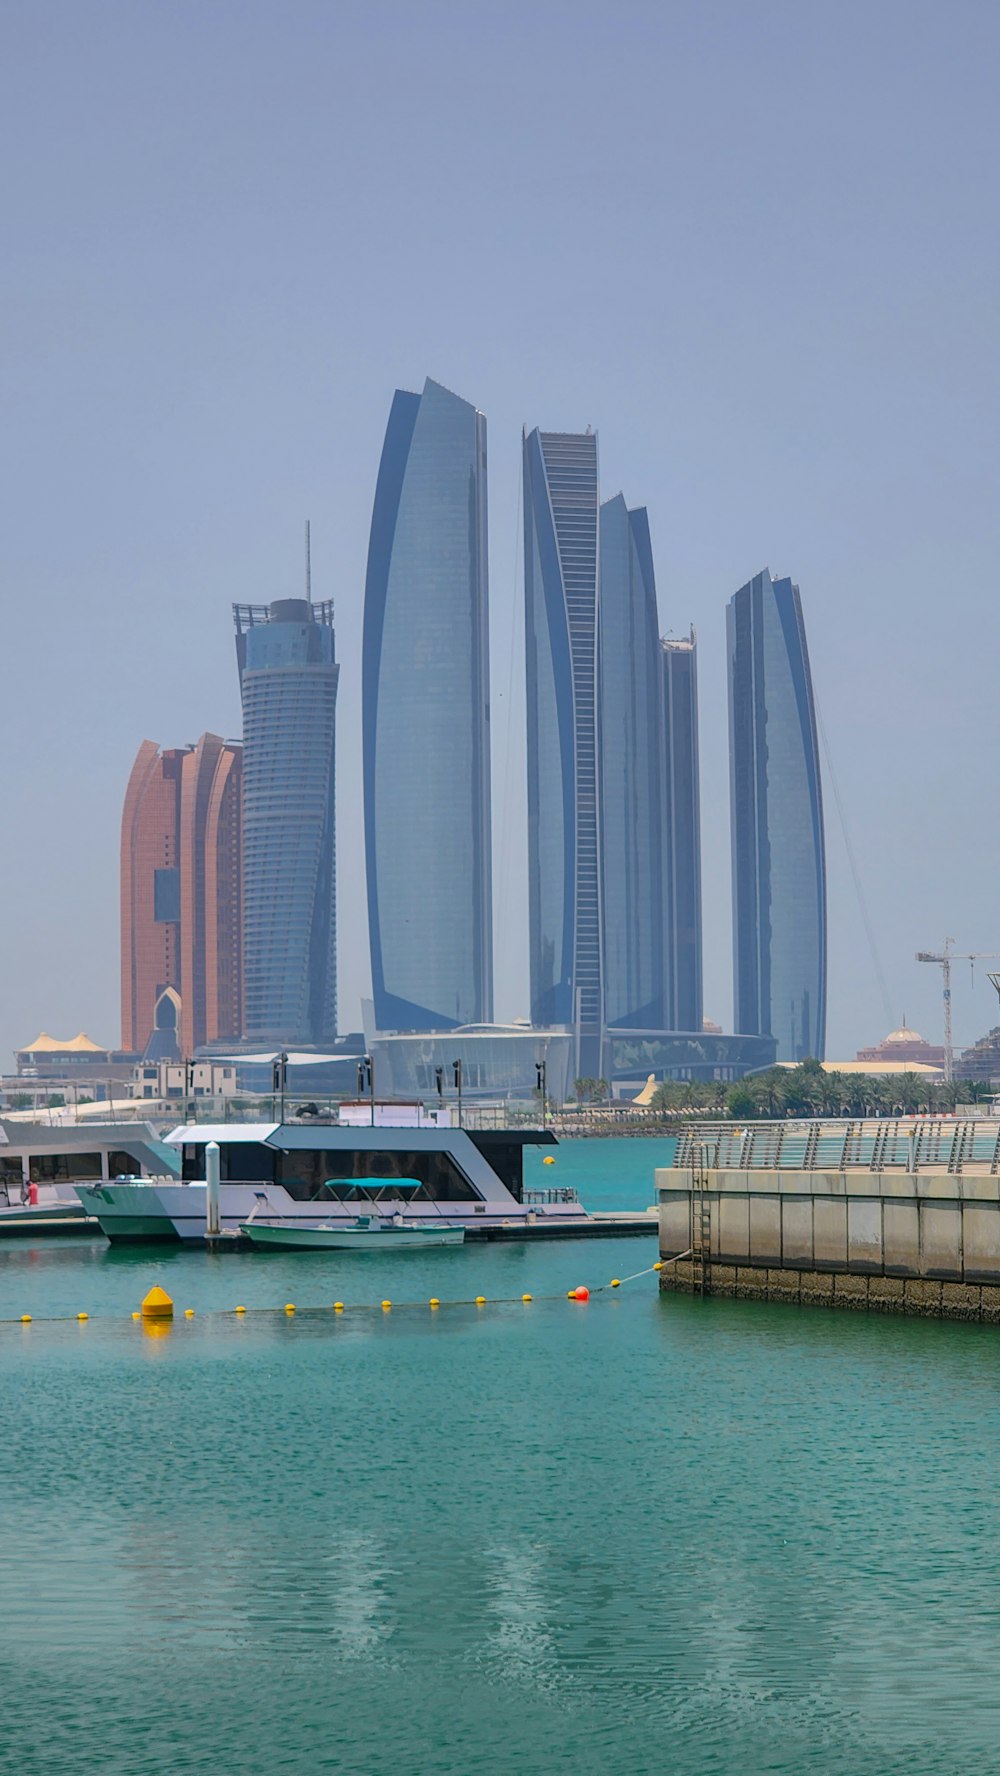 a boat in the water with tall buildings in the background